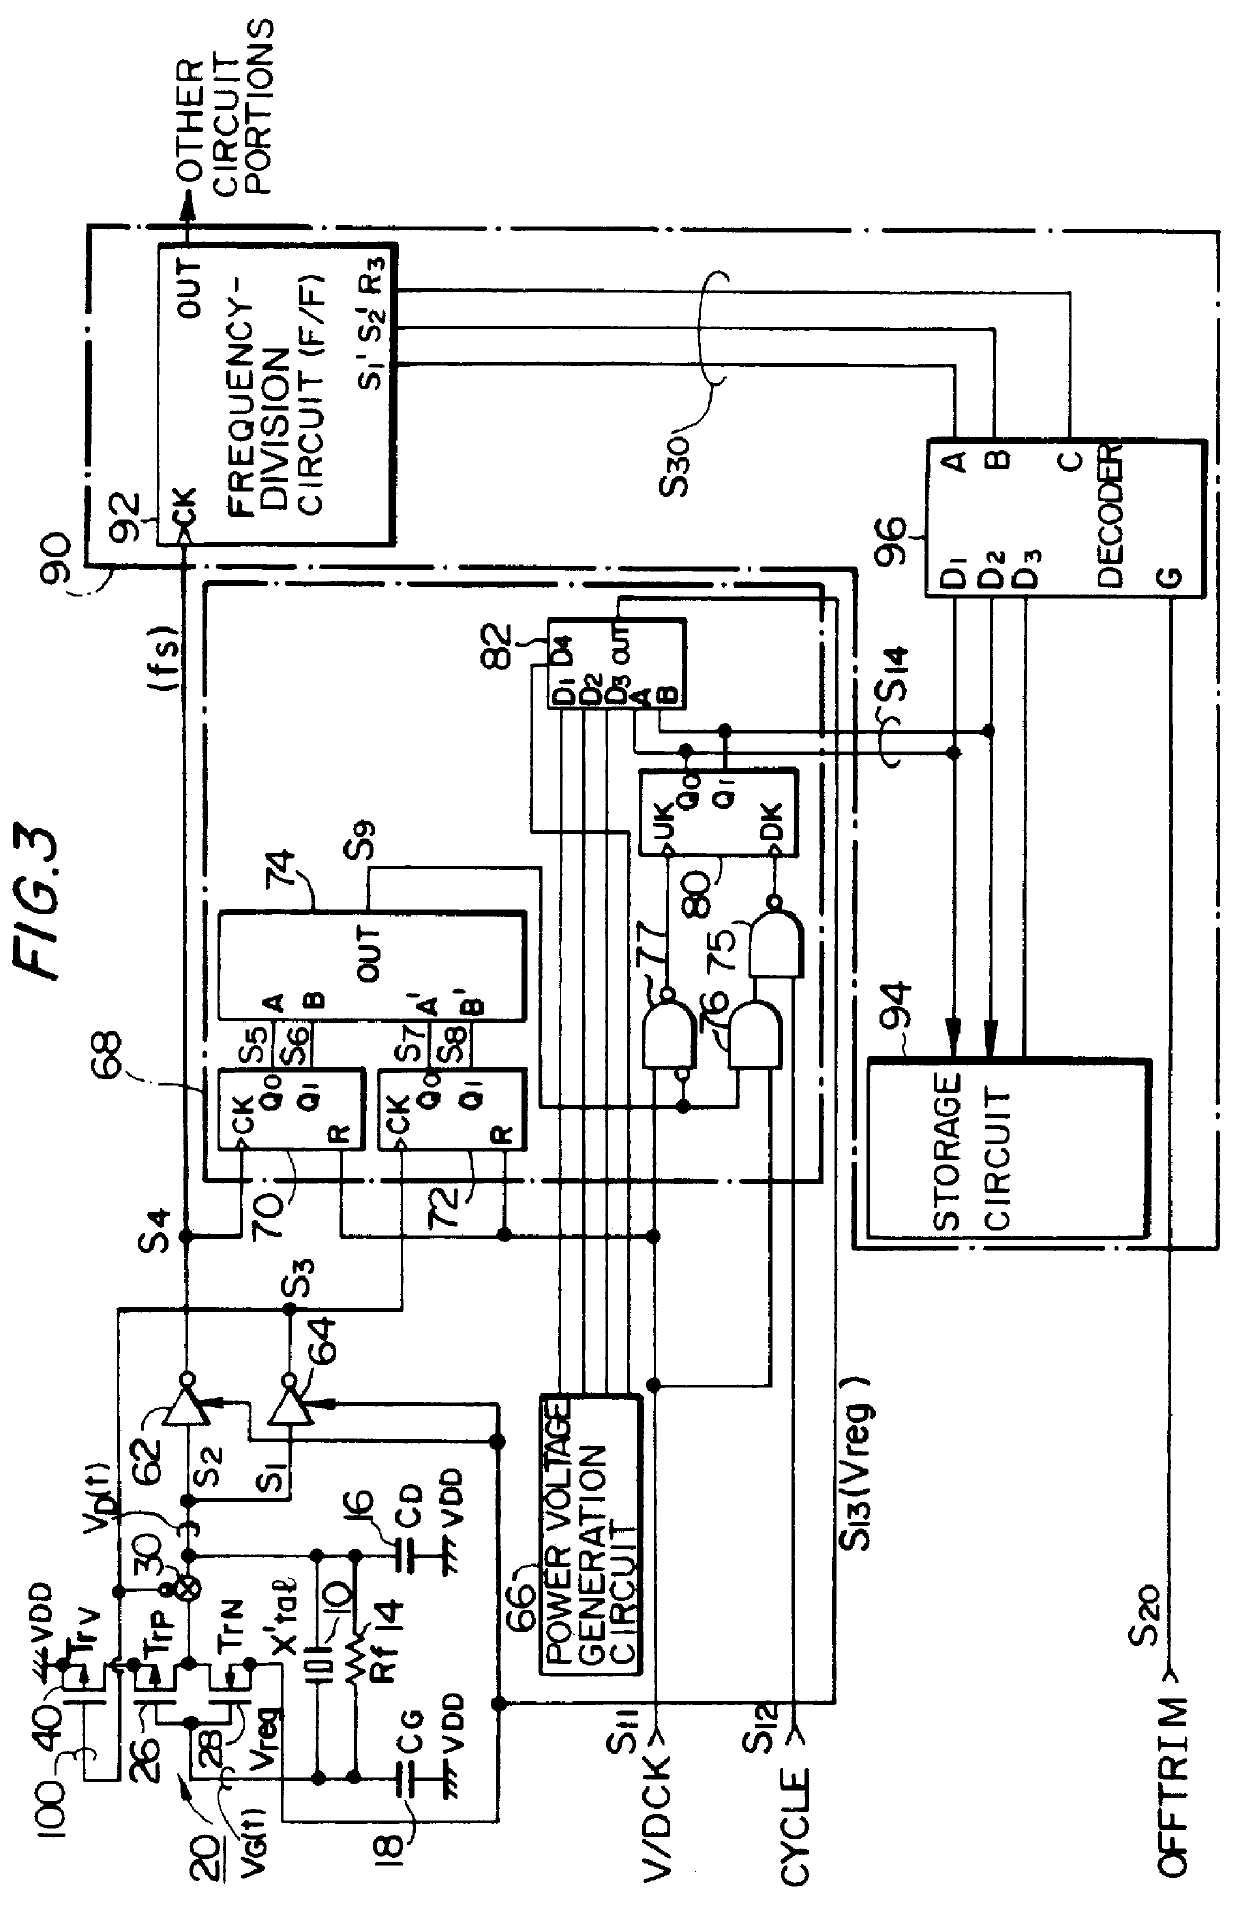 Oscillator circuit supplied with optimal power voltage according to oscillator output